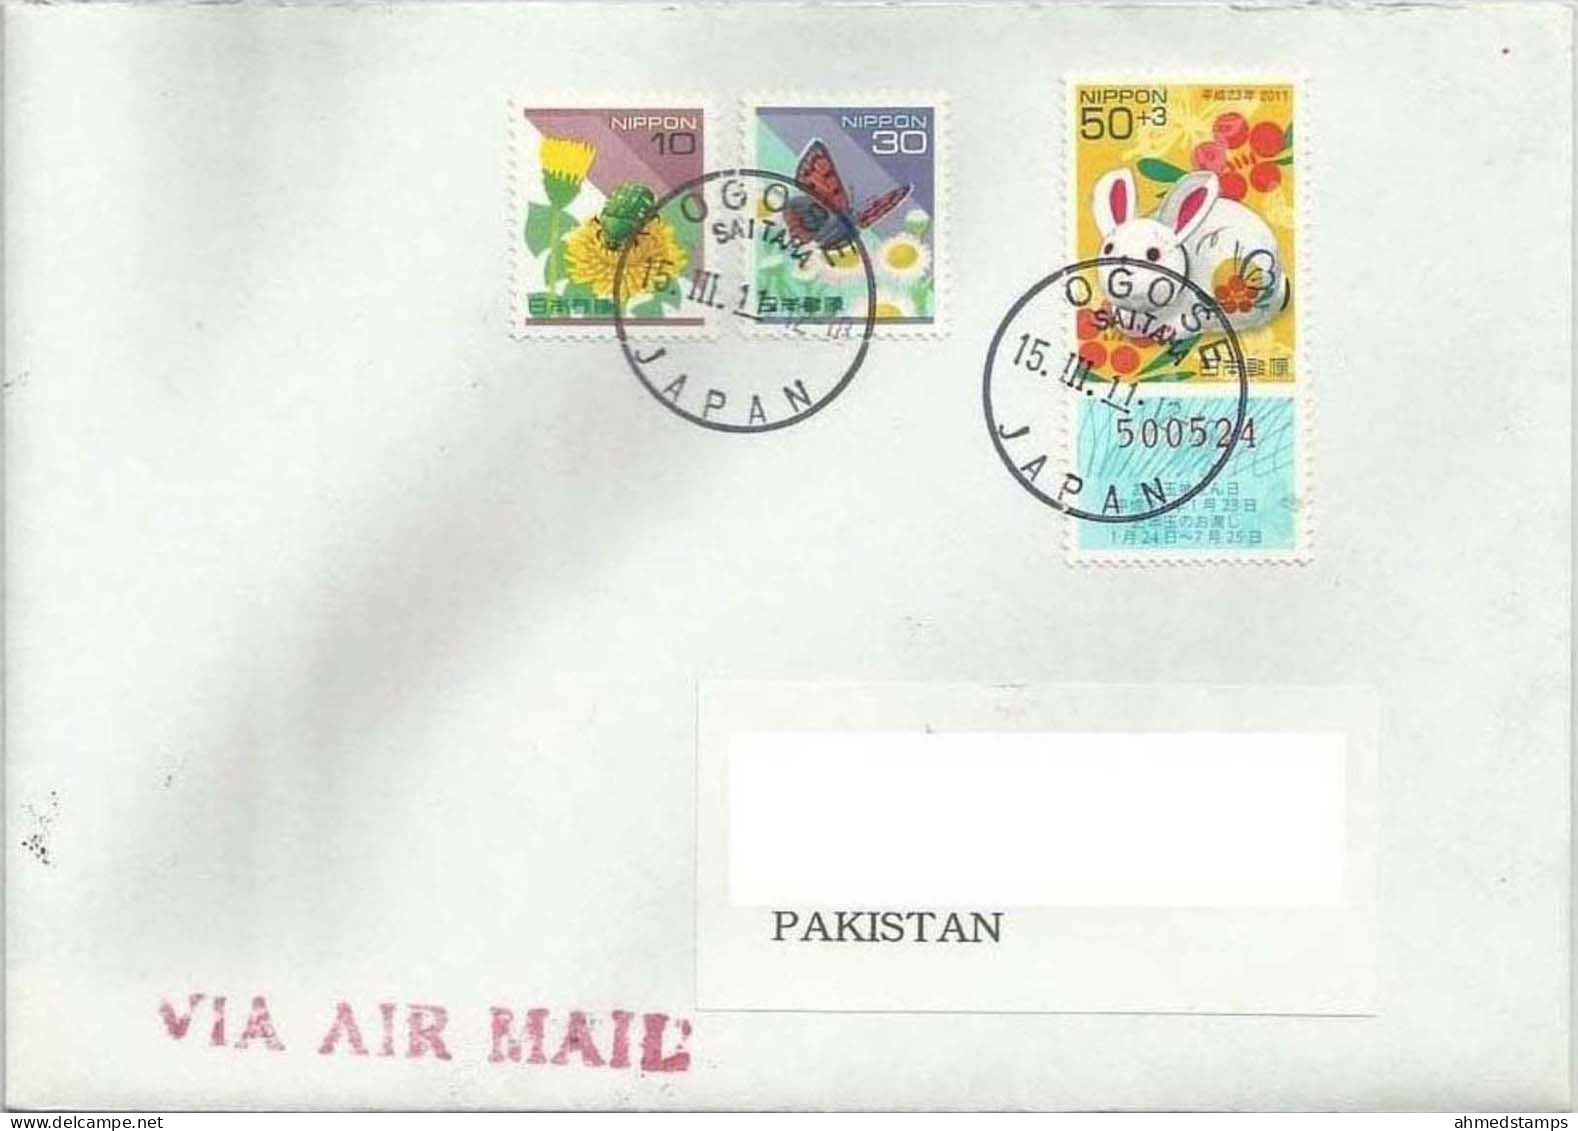 JAPAN POSTAL USED COVER AIRMAIL TO PAKISTAN BUTTERFLY FLOWERS RABBIT ANIMAL ANIMALS - Luftpost